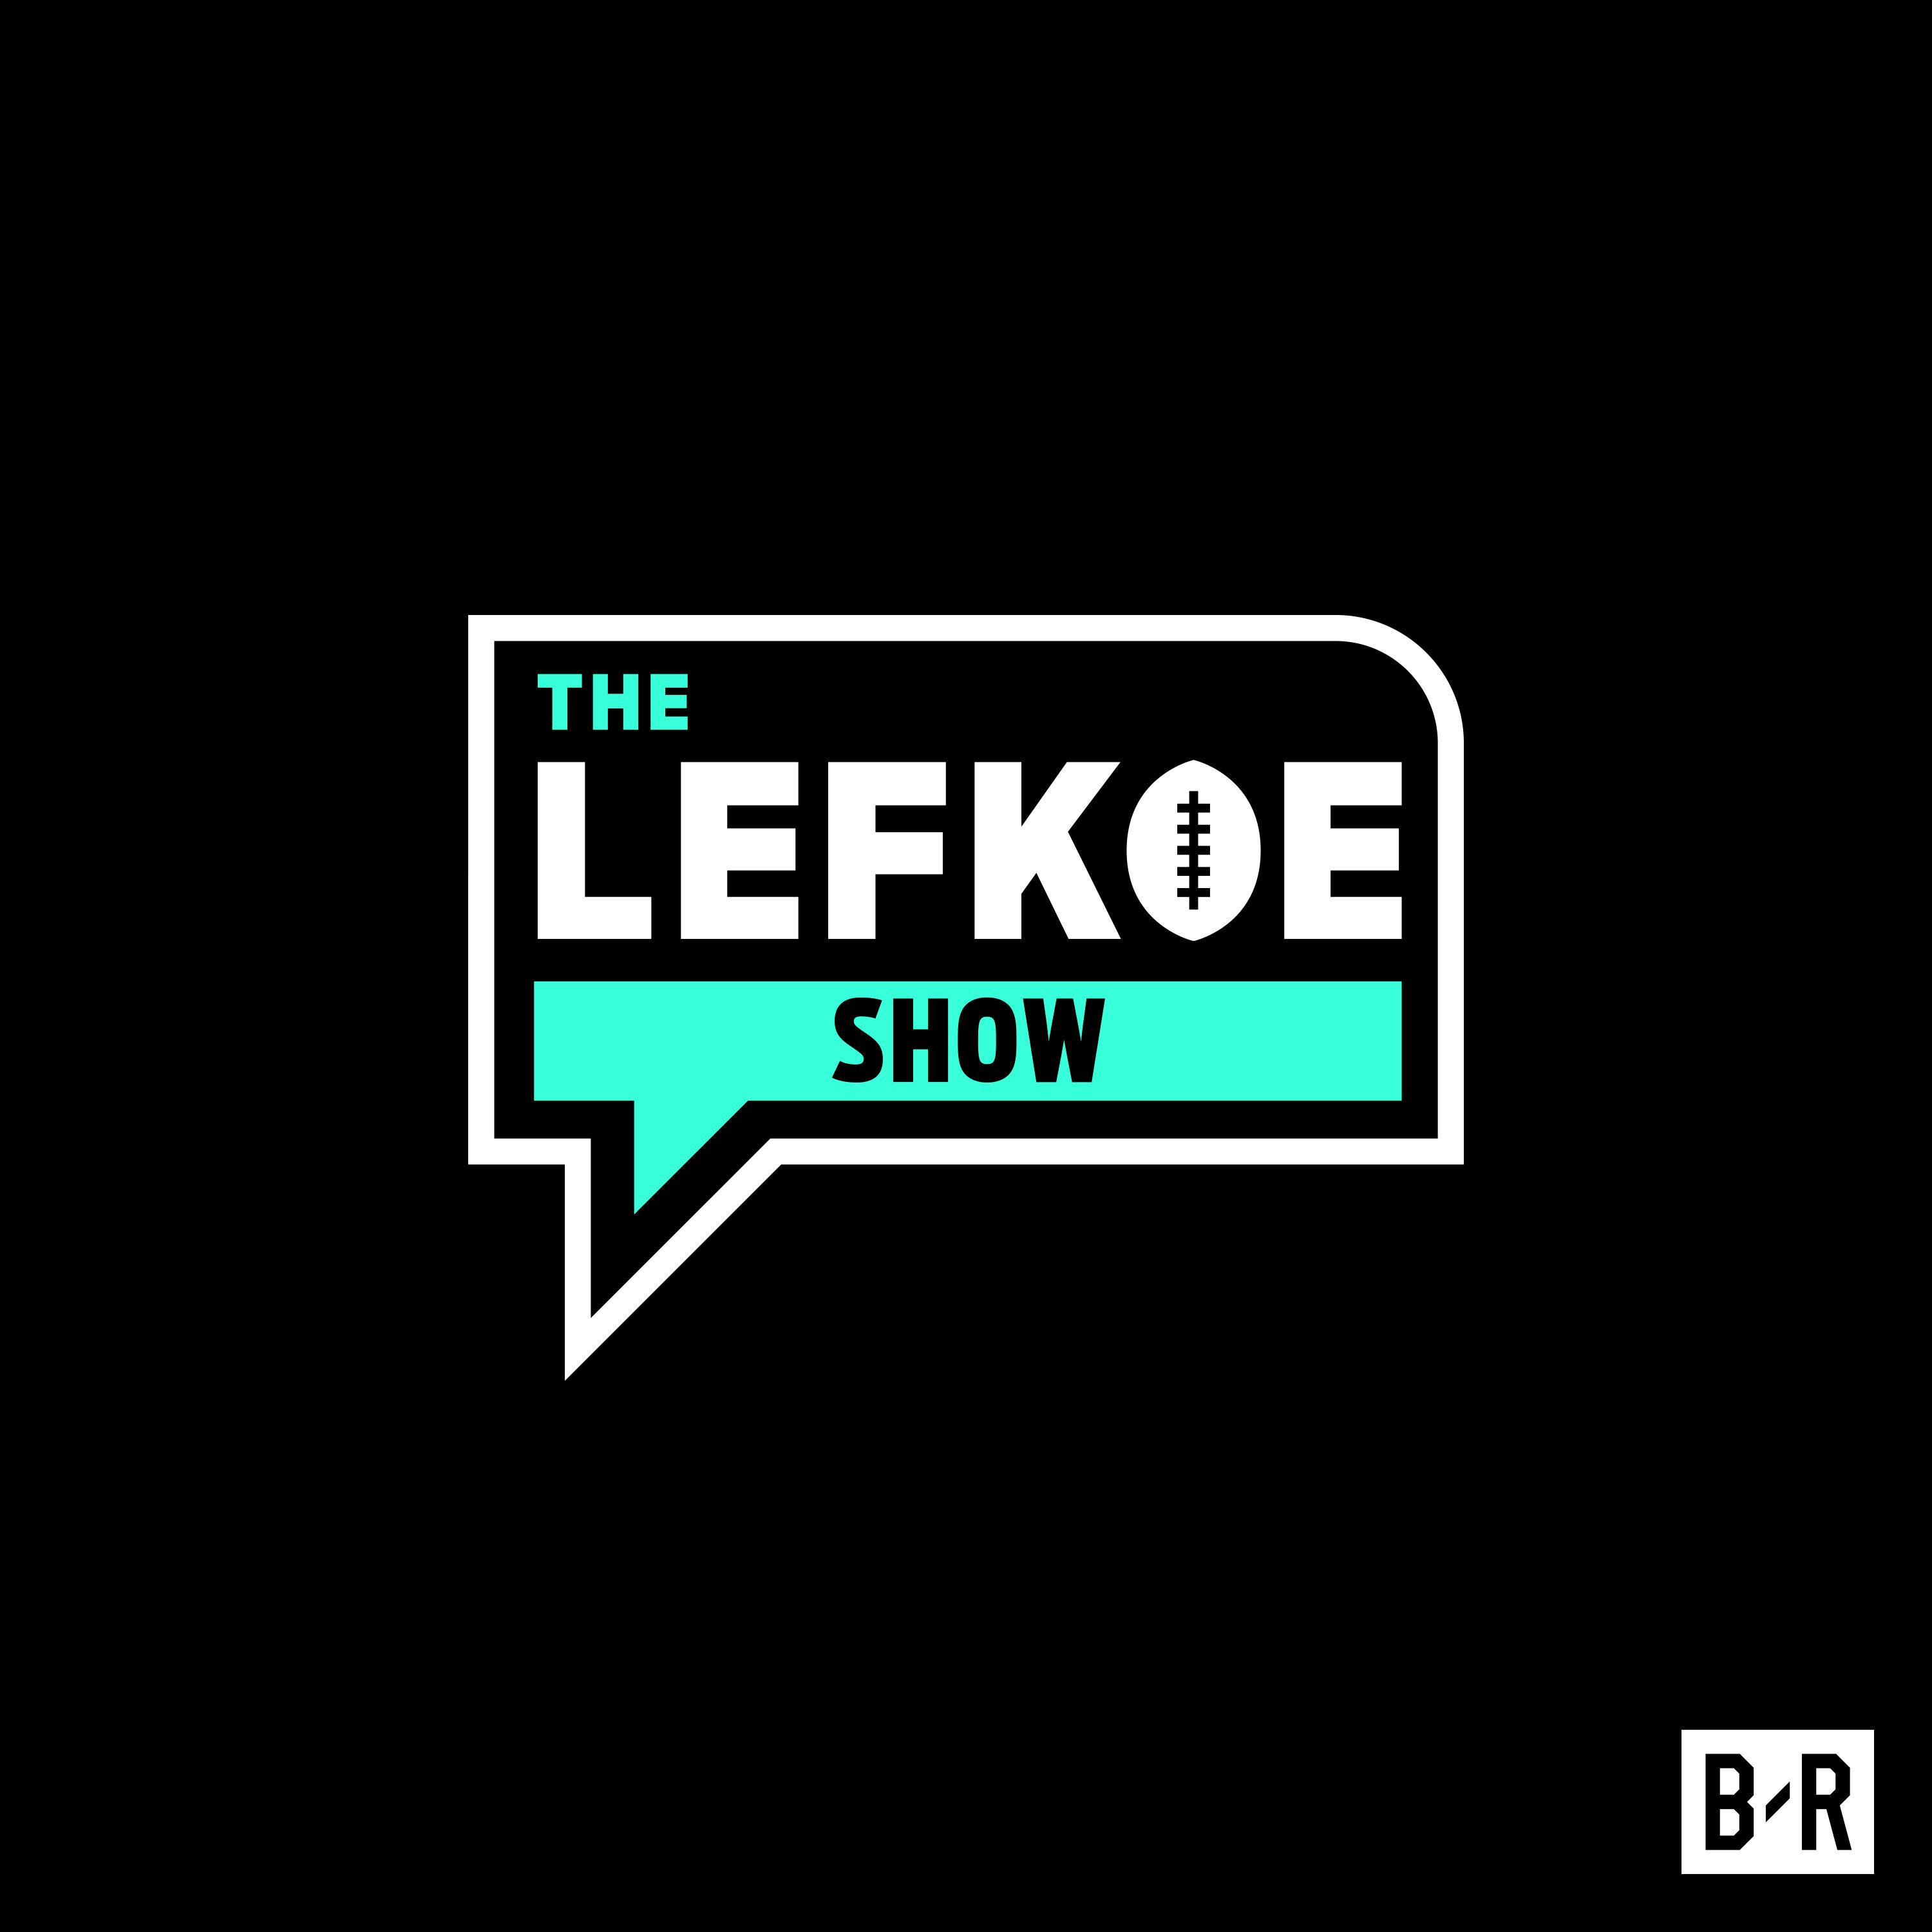 Comedian Dan Soder on the 49ers, WWE Legends, and Comedy During a Pandemic | The Lefkoe Show